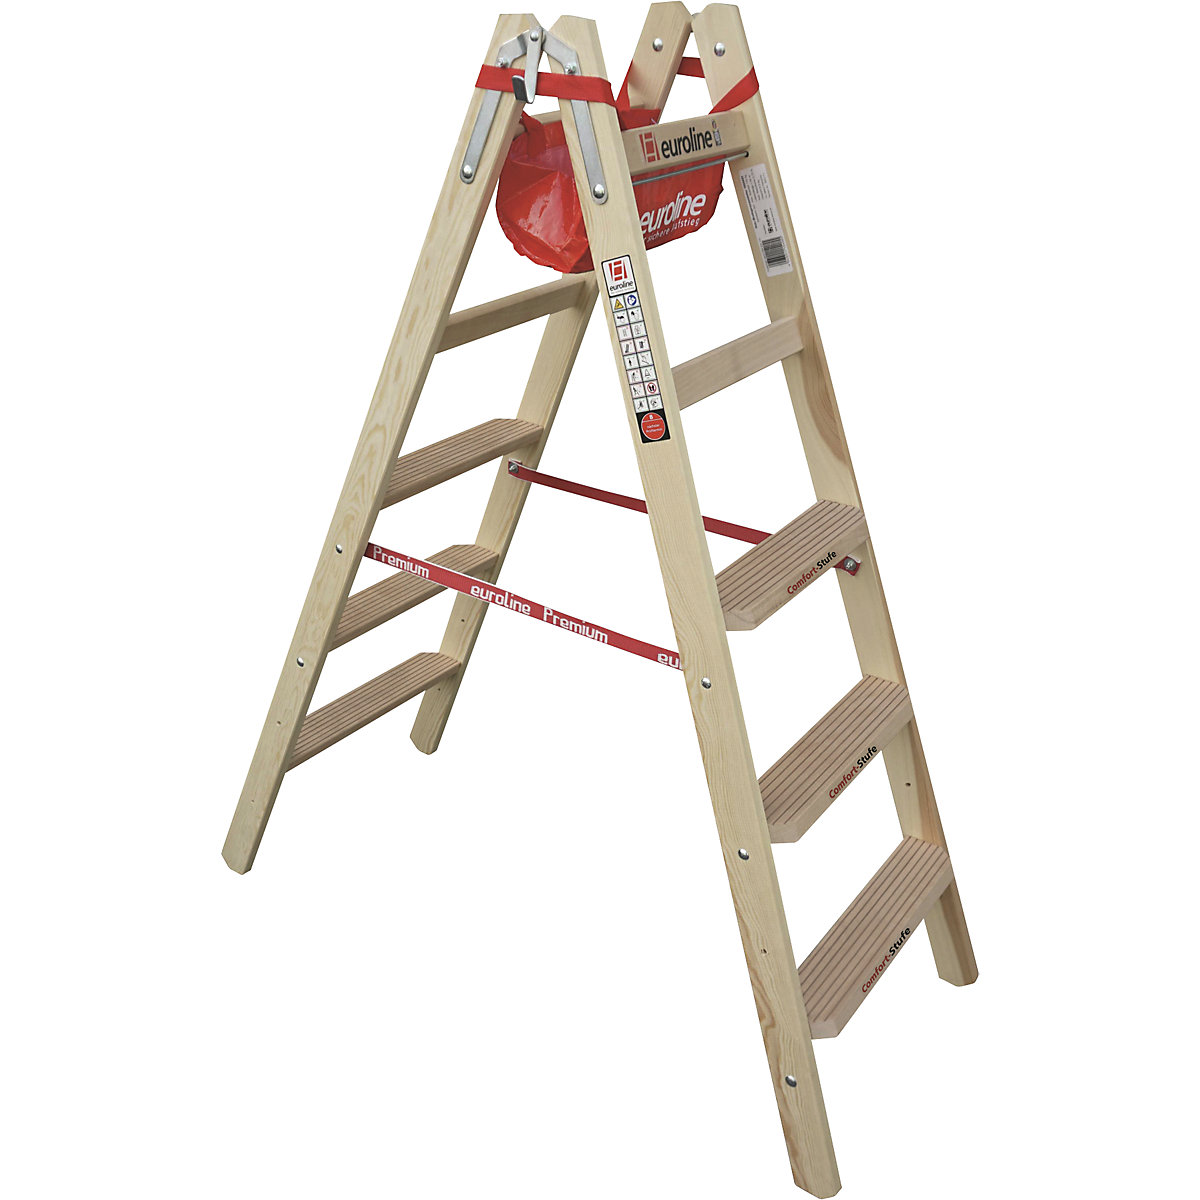 Wooden step ladder with comfort steps – euroline, double sided access, 2 x 5 steps-3